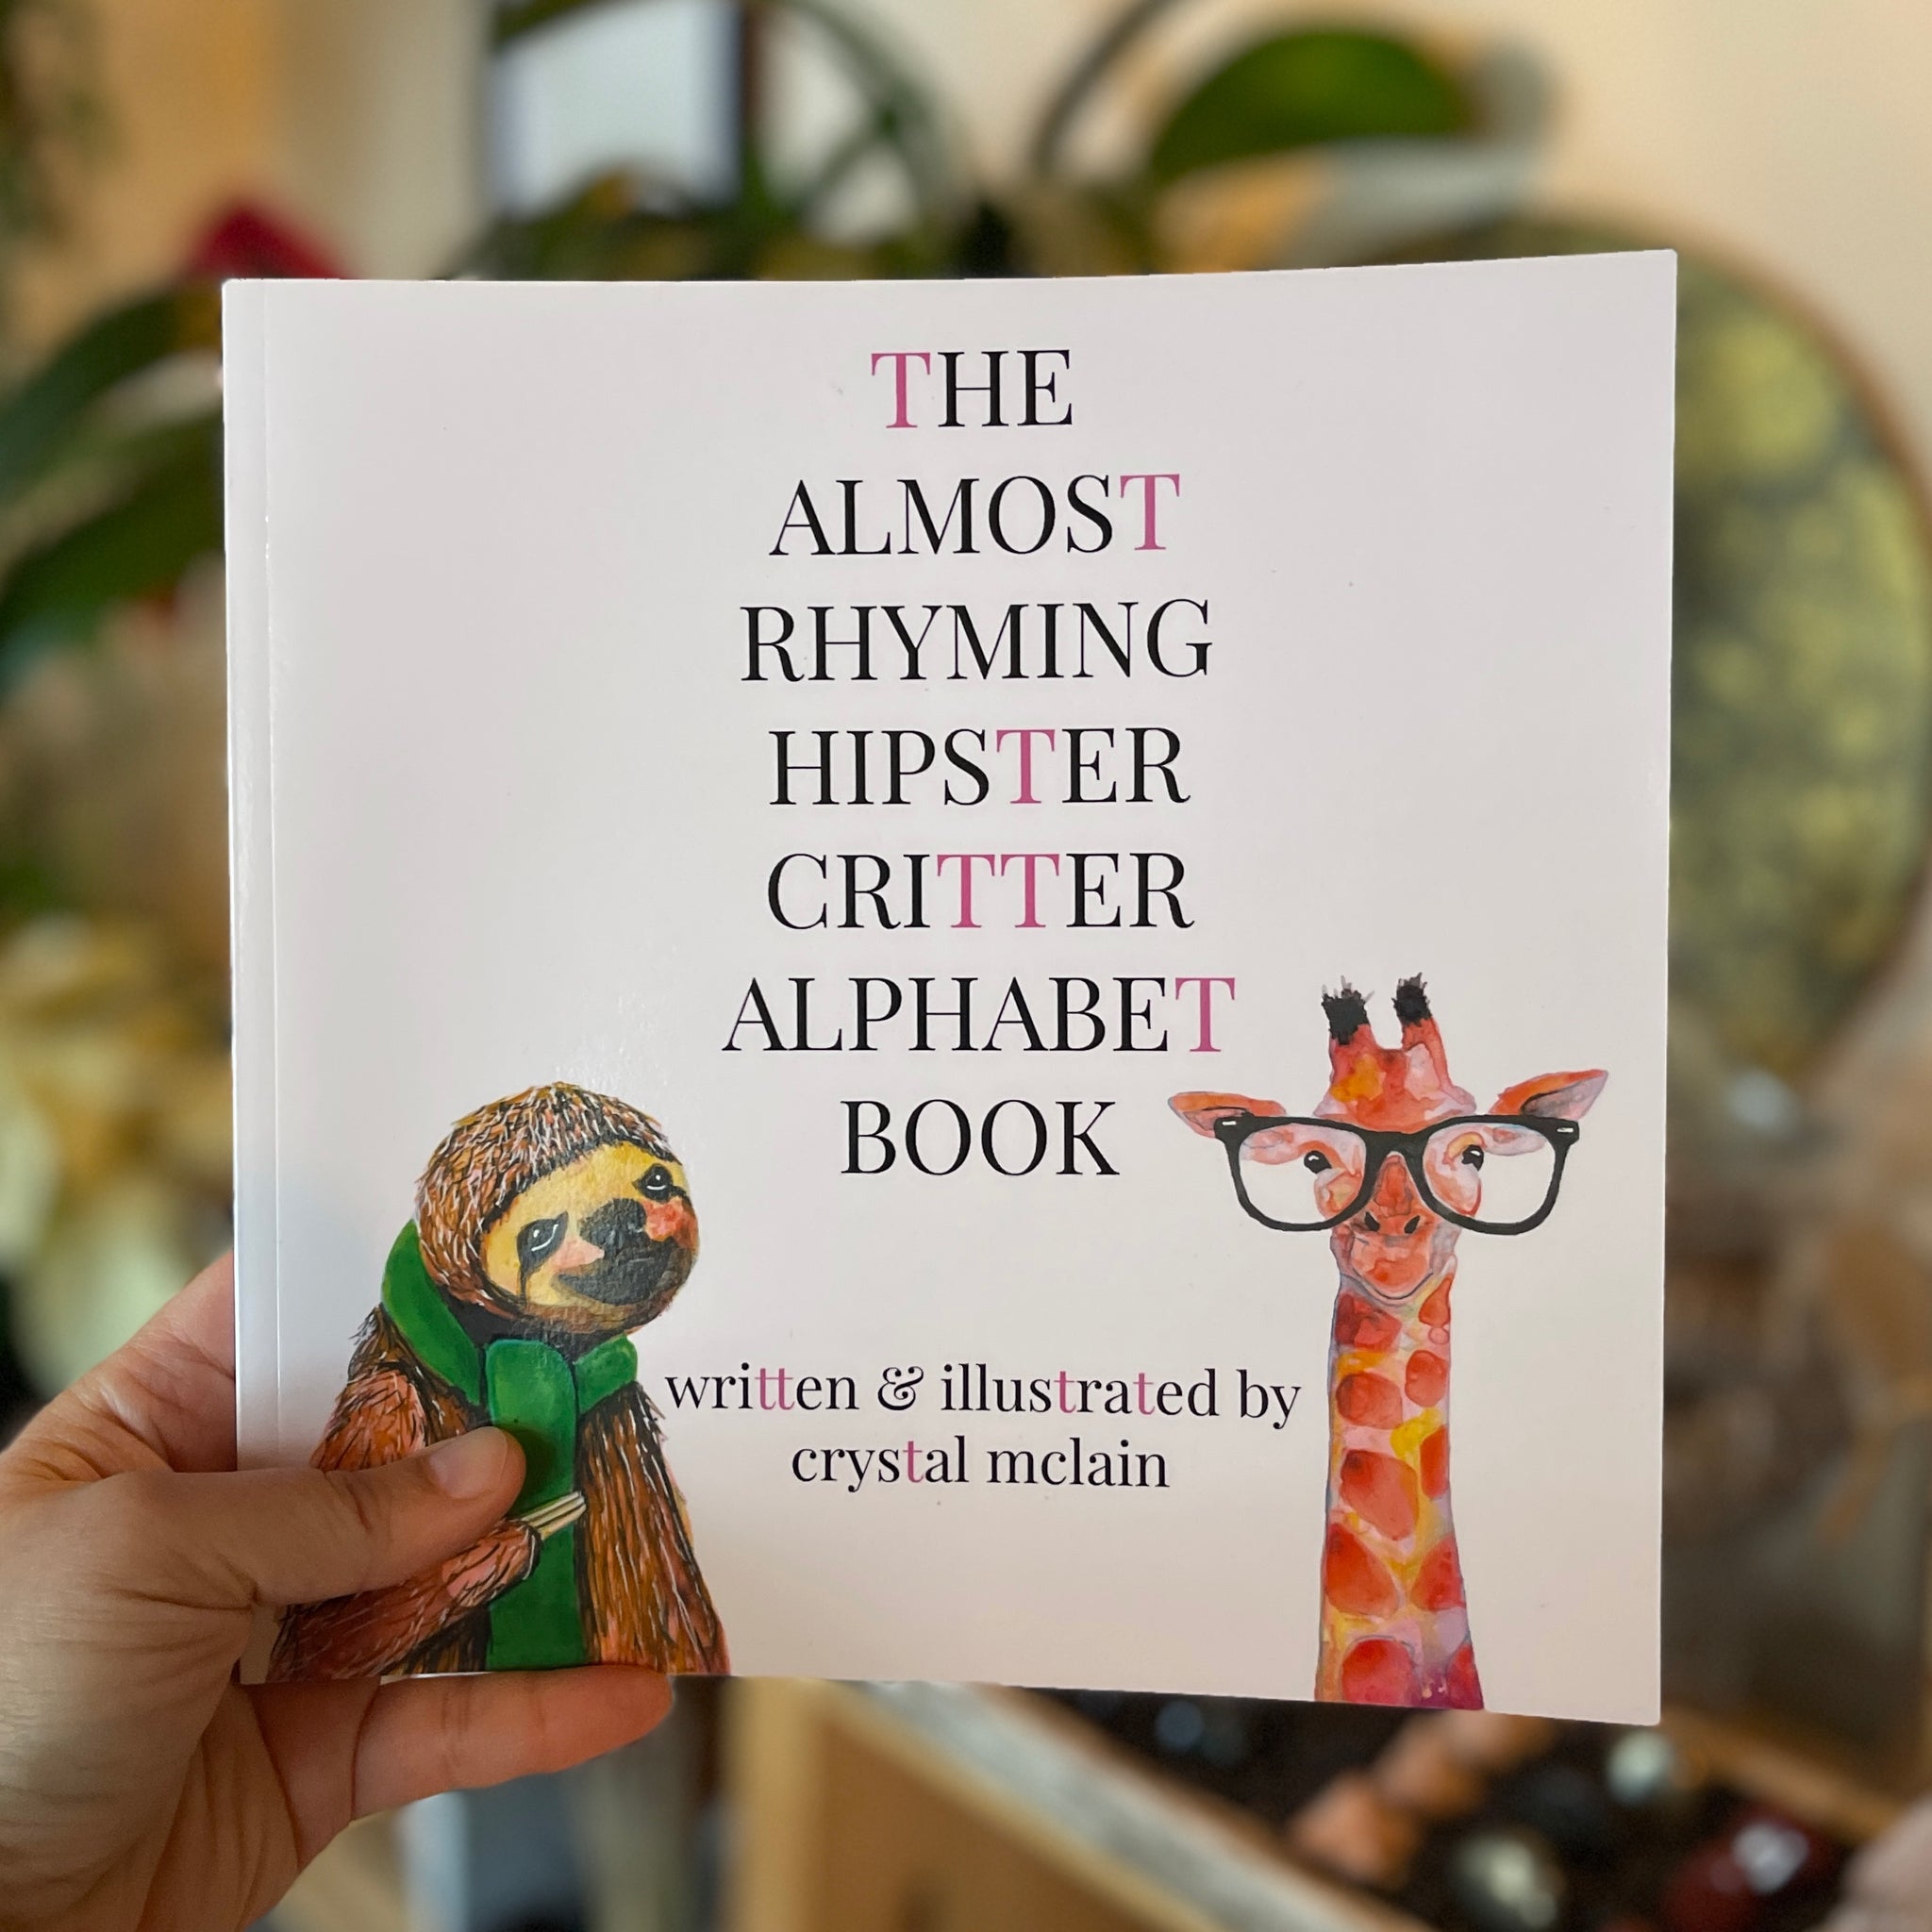 BOOK - The Almost Rhyming Hipster Critter Alphabet Book